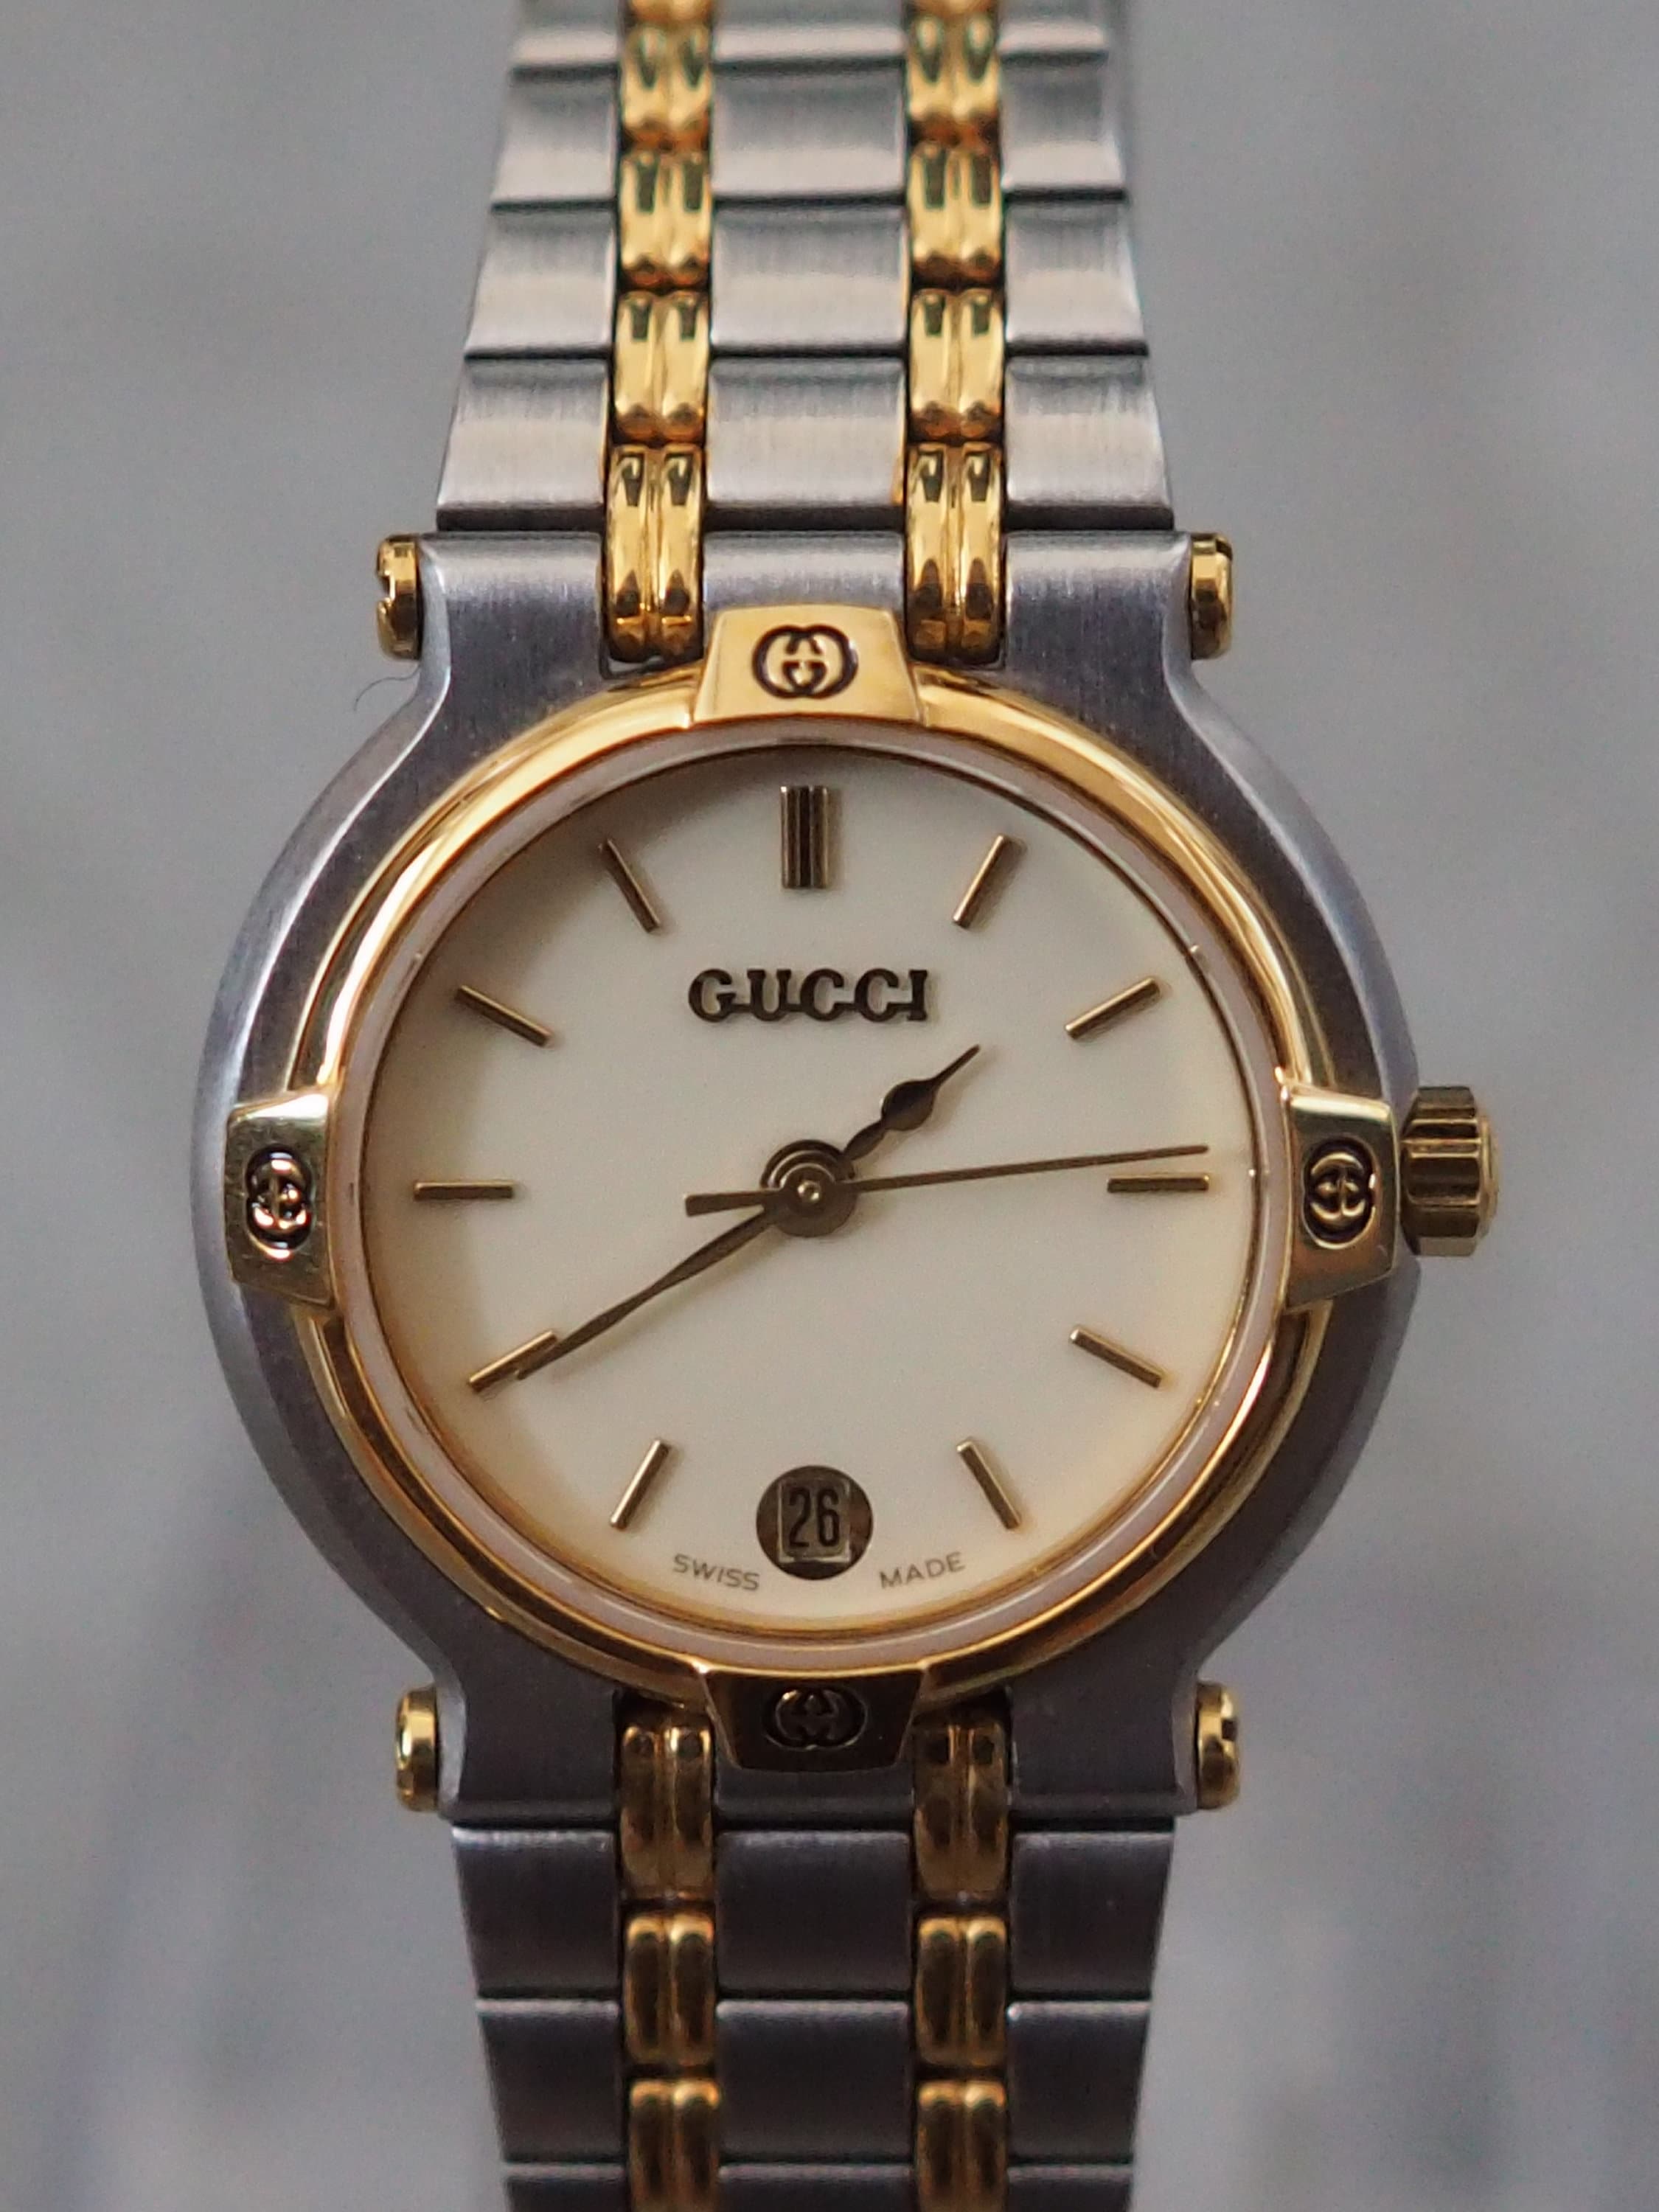 GUCCI Watch Wristwatch GG Gold Silver Metal Old Vintage Authentic